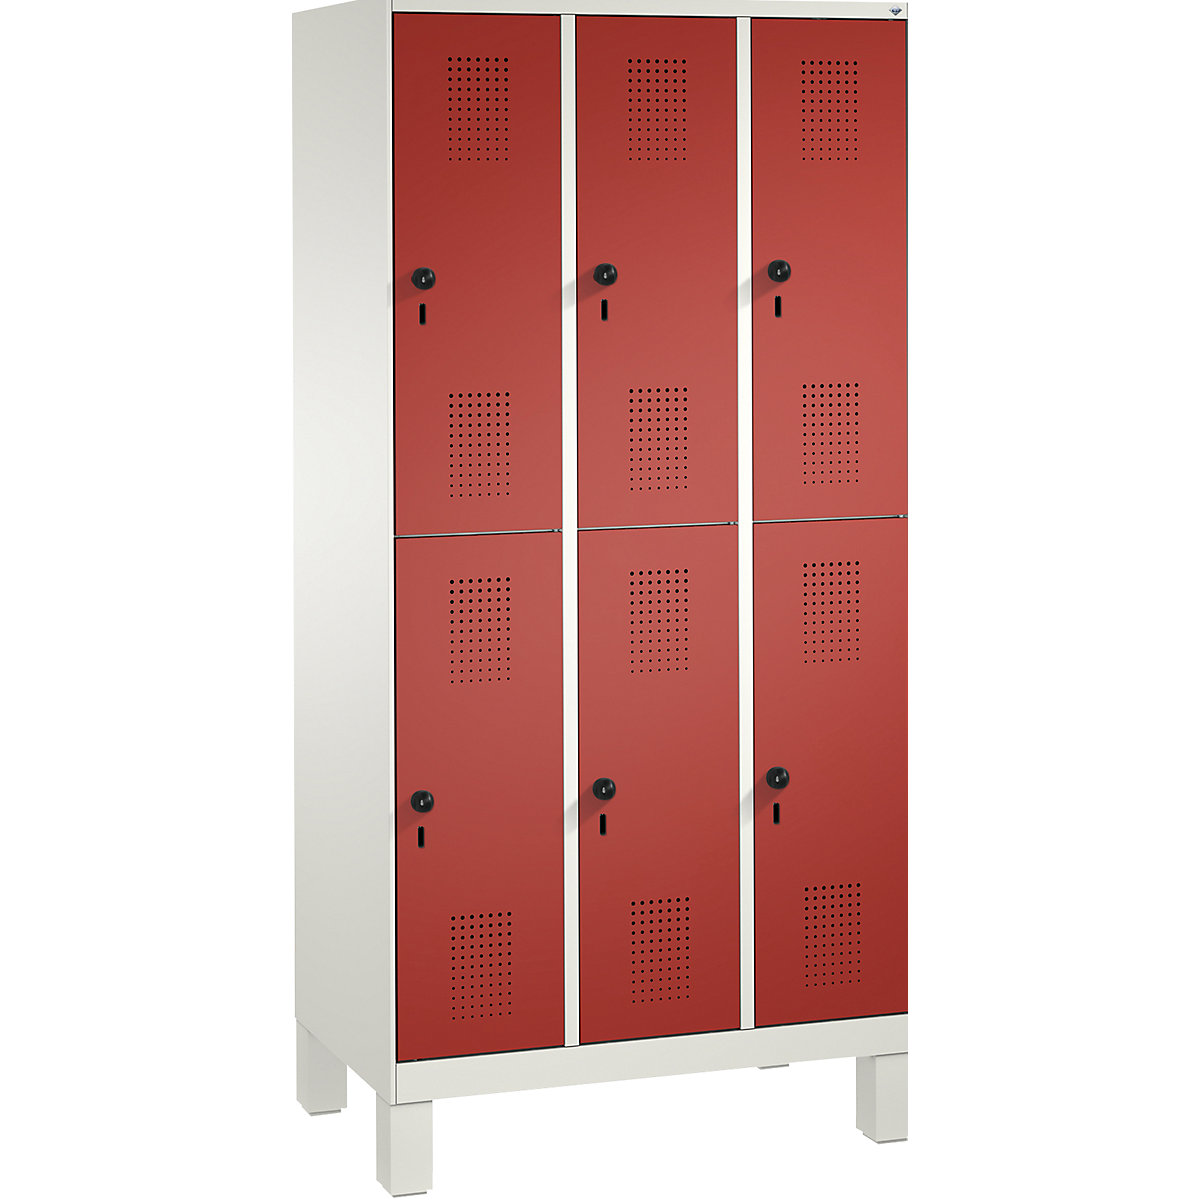 EVOLO cloakroom locker, double tier, with feet – C+P, 3 compartments, 2 shelf compartments each, compartment width 300 mm, traffic white / flame red-8